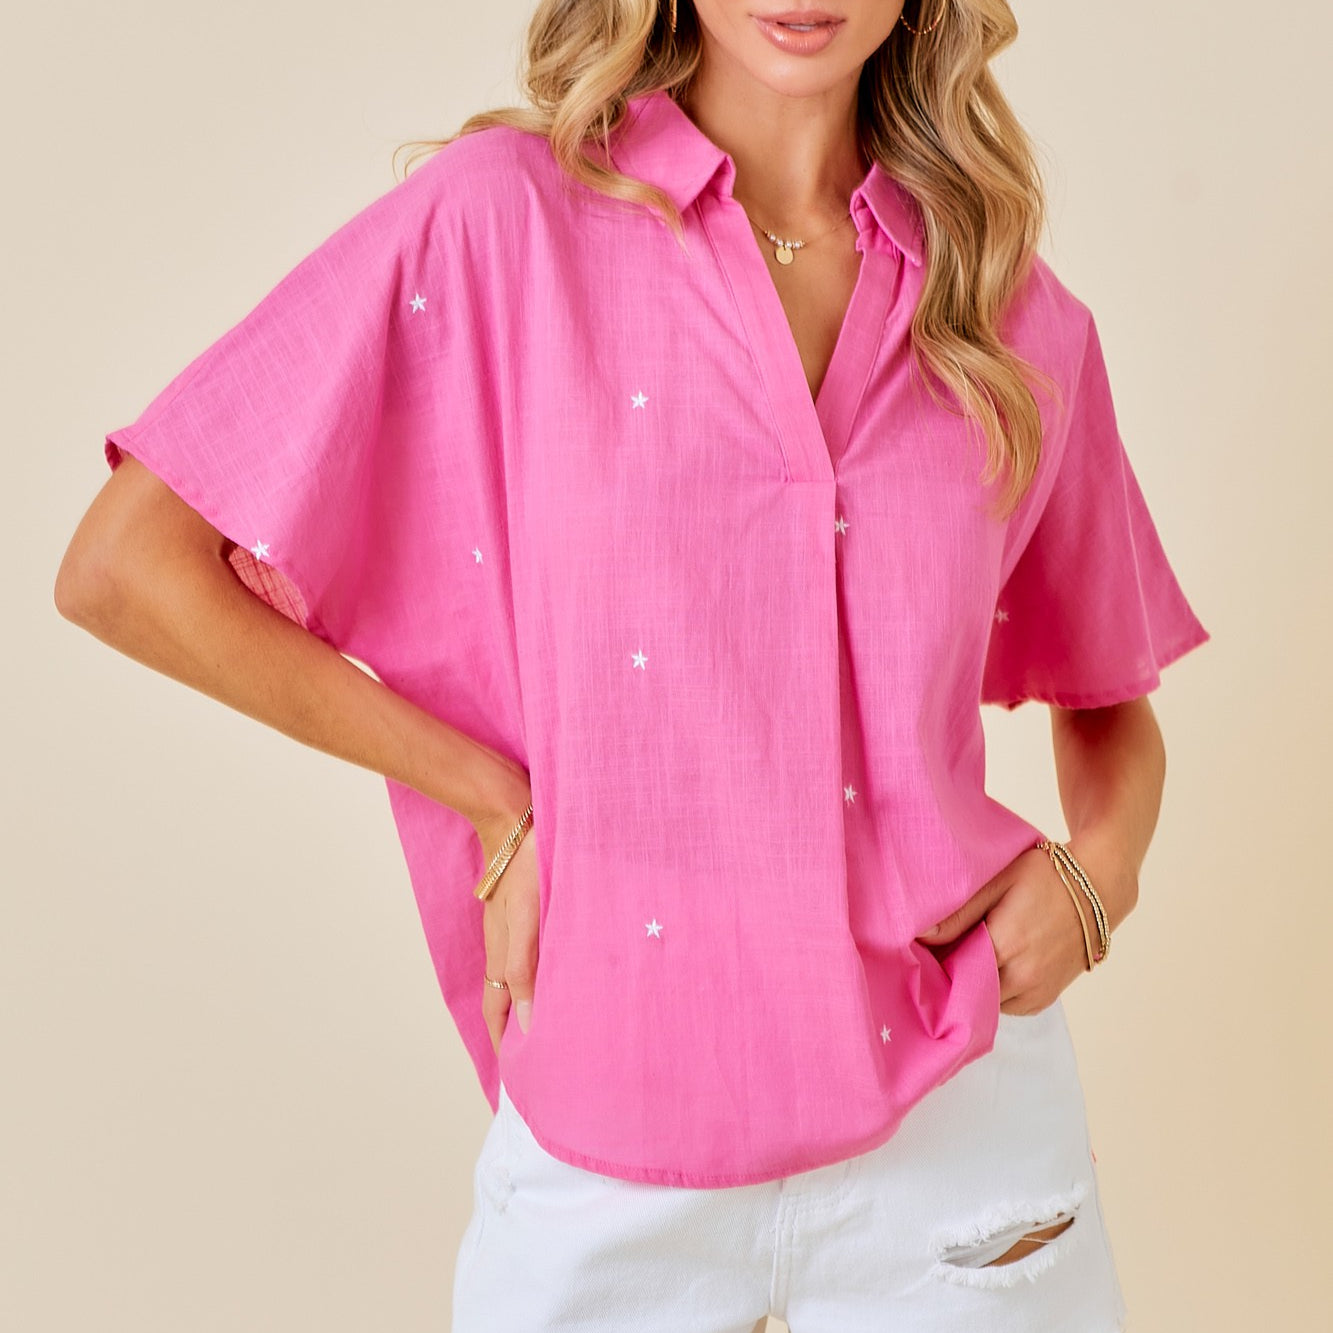 pink star blouse